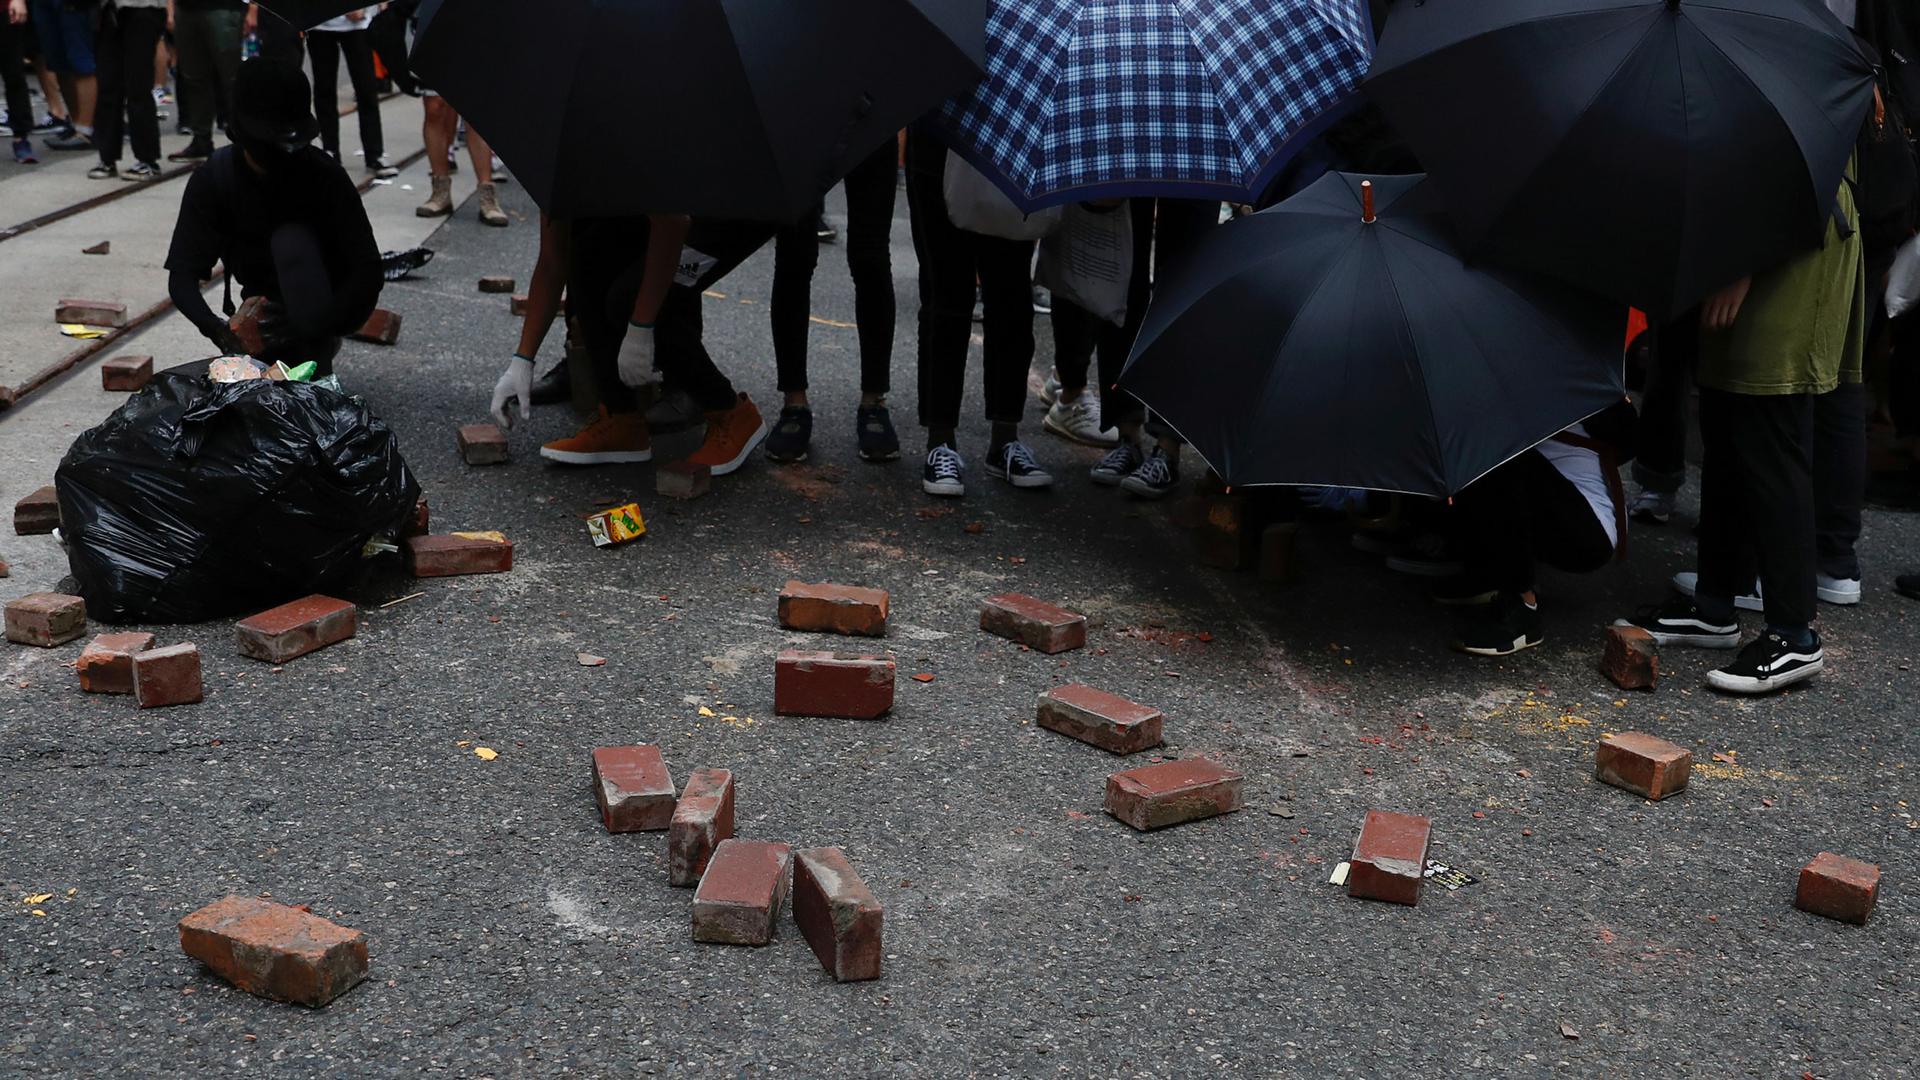 A crowd of people hold umbrellas toward the camera with several bricks laying in the street.